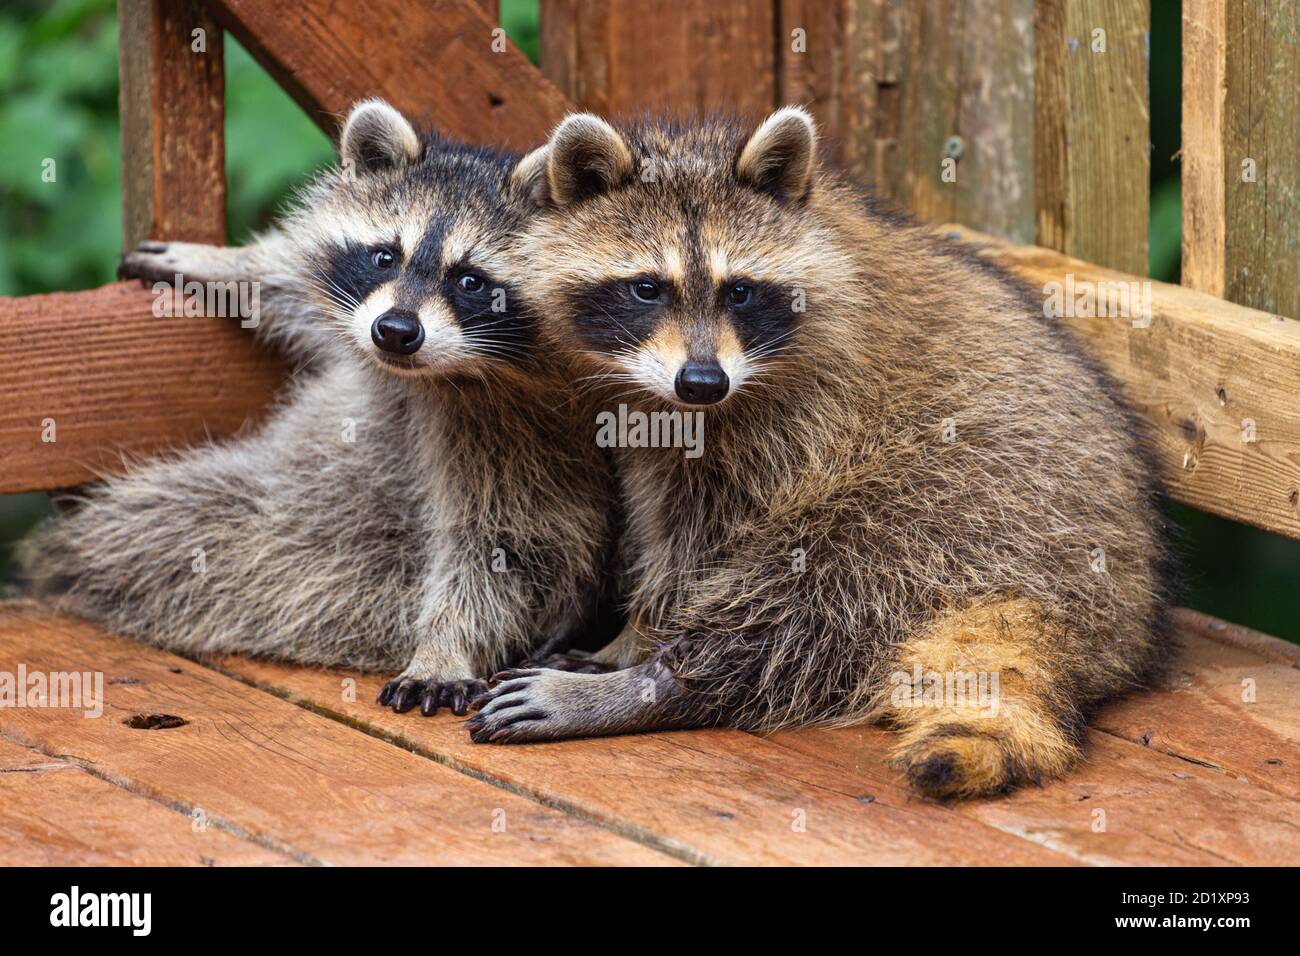 Two young raccoons snuggled together in the corner of a weathered wooden deck in rural New Brunswick, Canada. Stock Photo